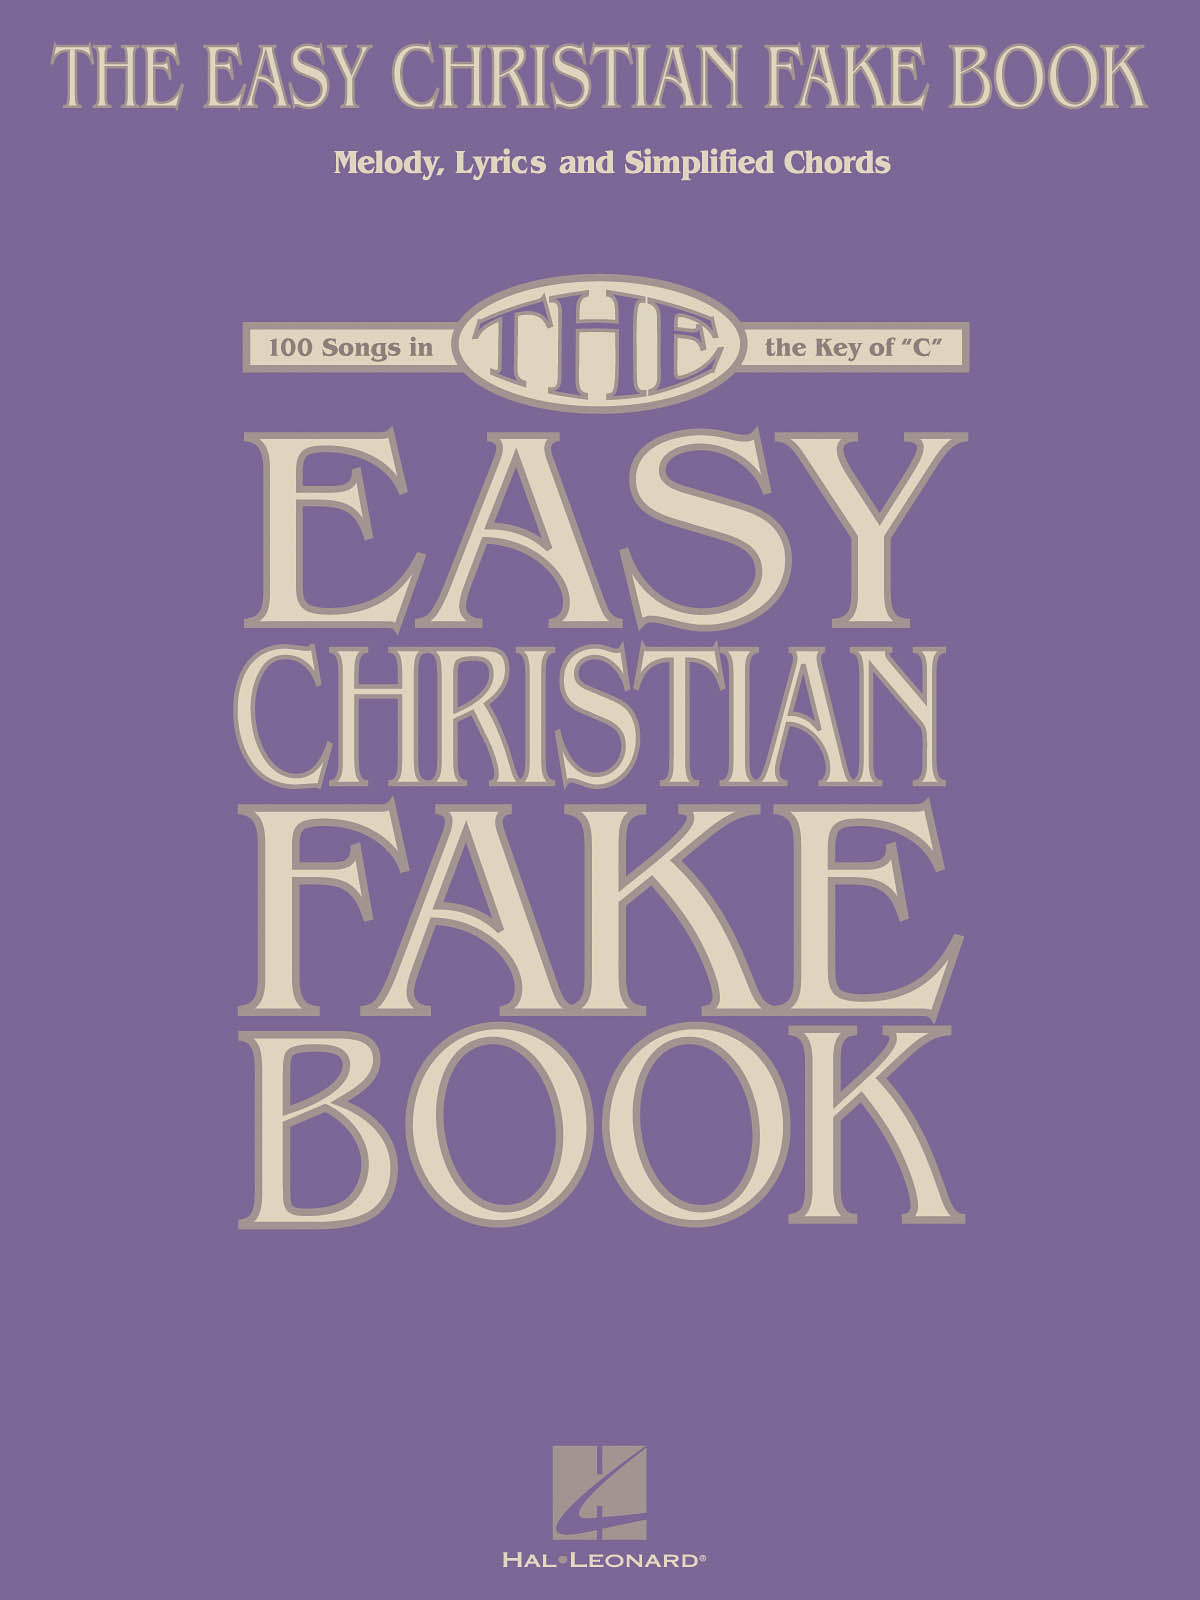 The Easy Christian Fake Book - 100 Songs in the Key of C